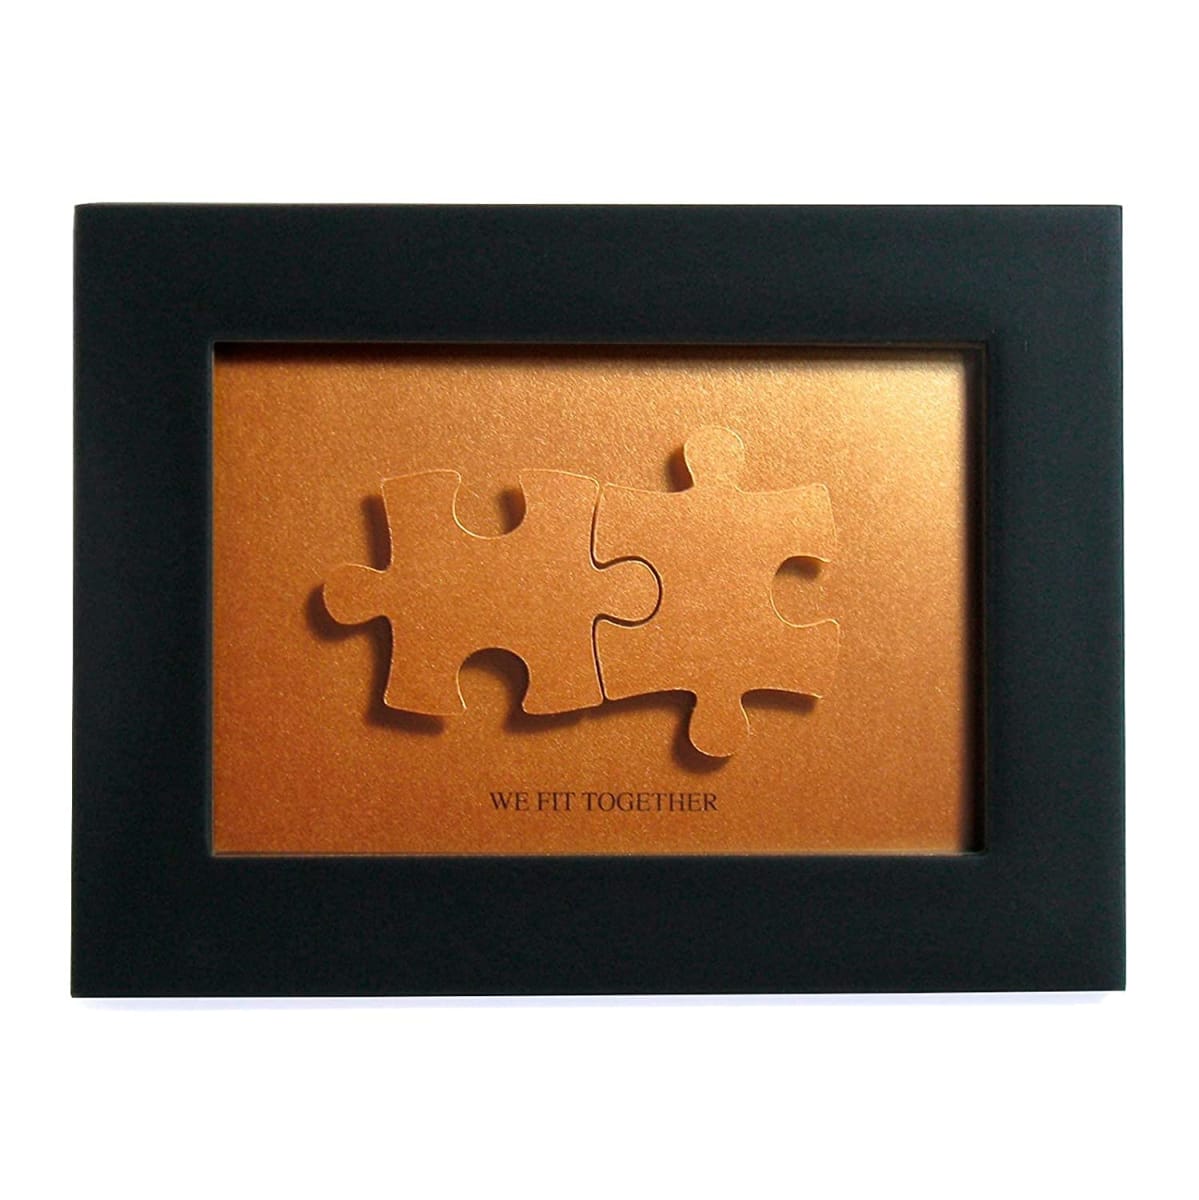 We fit together Puzzle Paper Cut Art - the Creative Gift for 8th Anniversary, Valentine Gift for him or her - DIY the Name and Date on Bronze Color Jigsaw